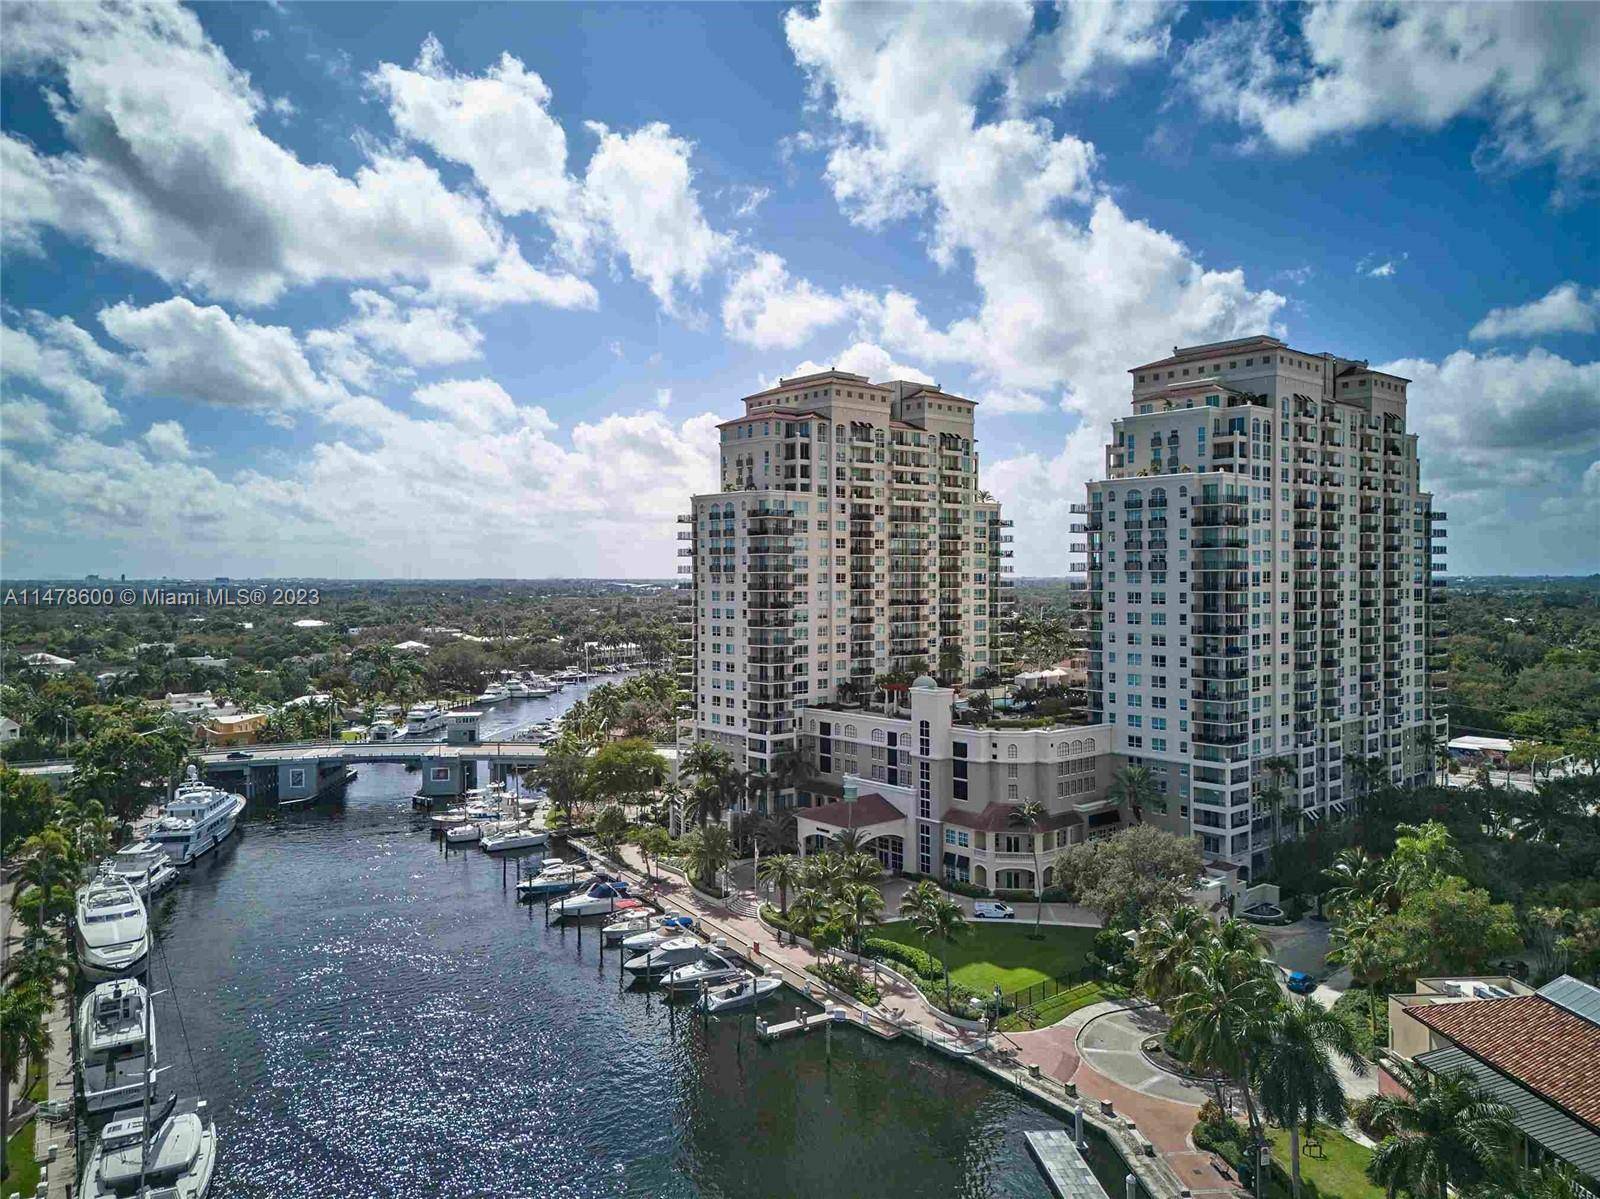 NEW PRICE REDUCTION ! DON'T MISS THIS AMAZING AND RARE OPPORTUNITY to buy a boat slip for an additional price with this already BEST priced 1Br 1Bath condo at The ...